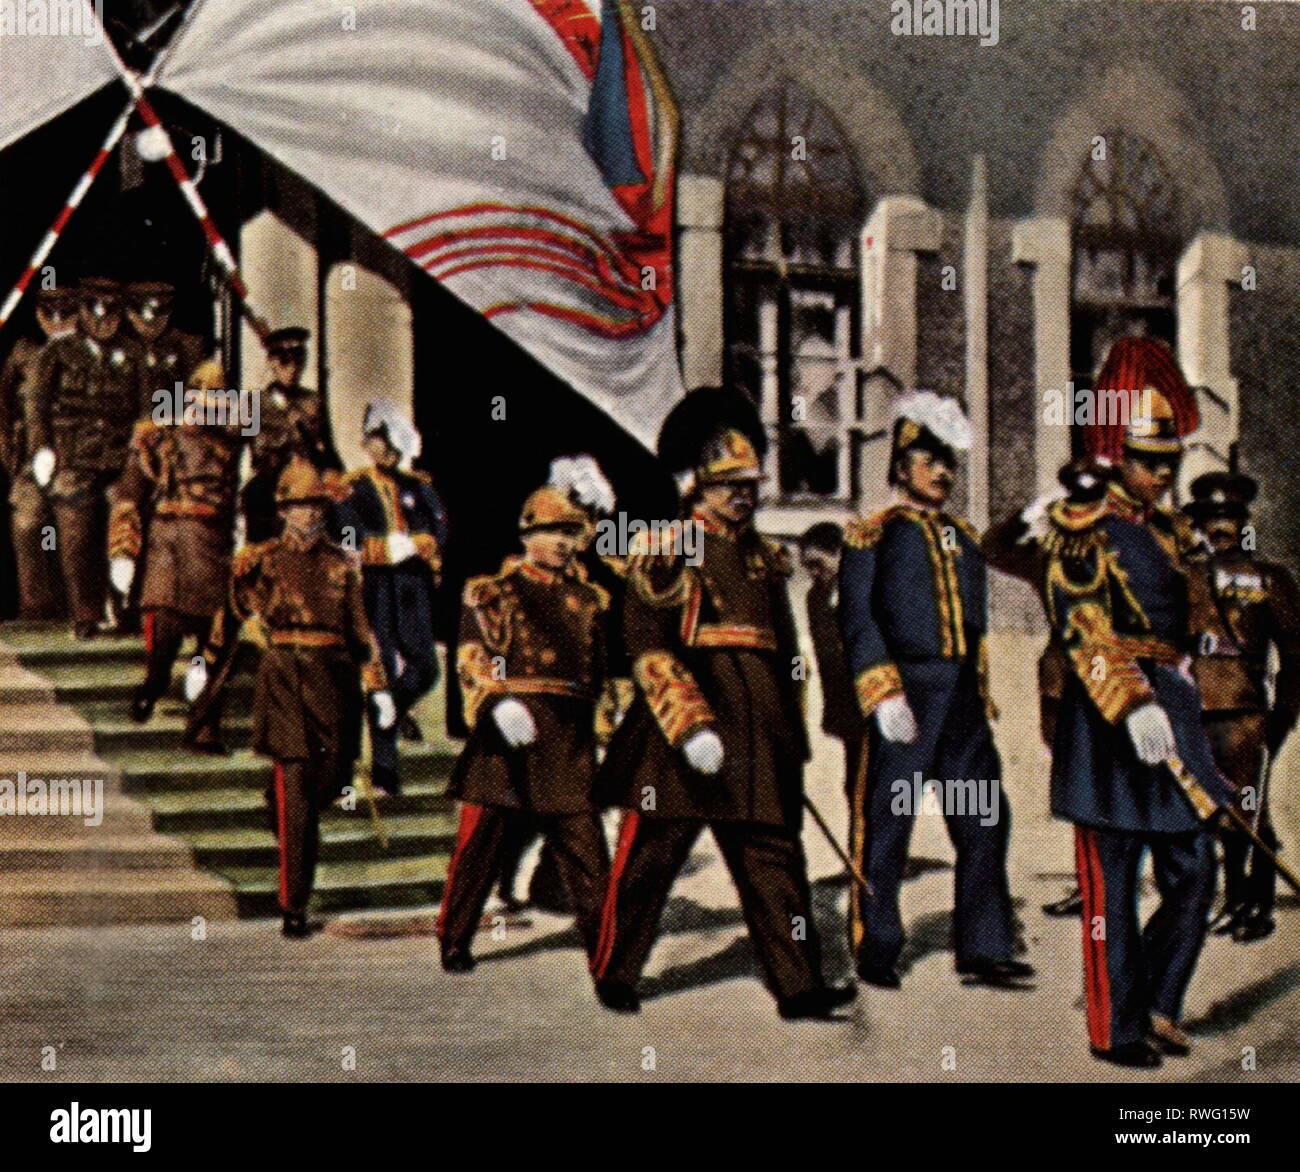 Puyi (Xuantong), 7.2.1906 - 17.10.1967, Emperor of Manchukuo 1.3.1934 - 15.8.1945, full length (on the right), after the coronation, 1.3.1934, coloured photograph, cigarette card, series 'Die Nachkriegszeit', 1935, Additional-Rights-Clearance-Info-Not-Available Stock Photo